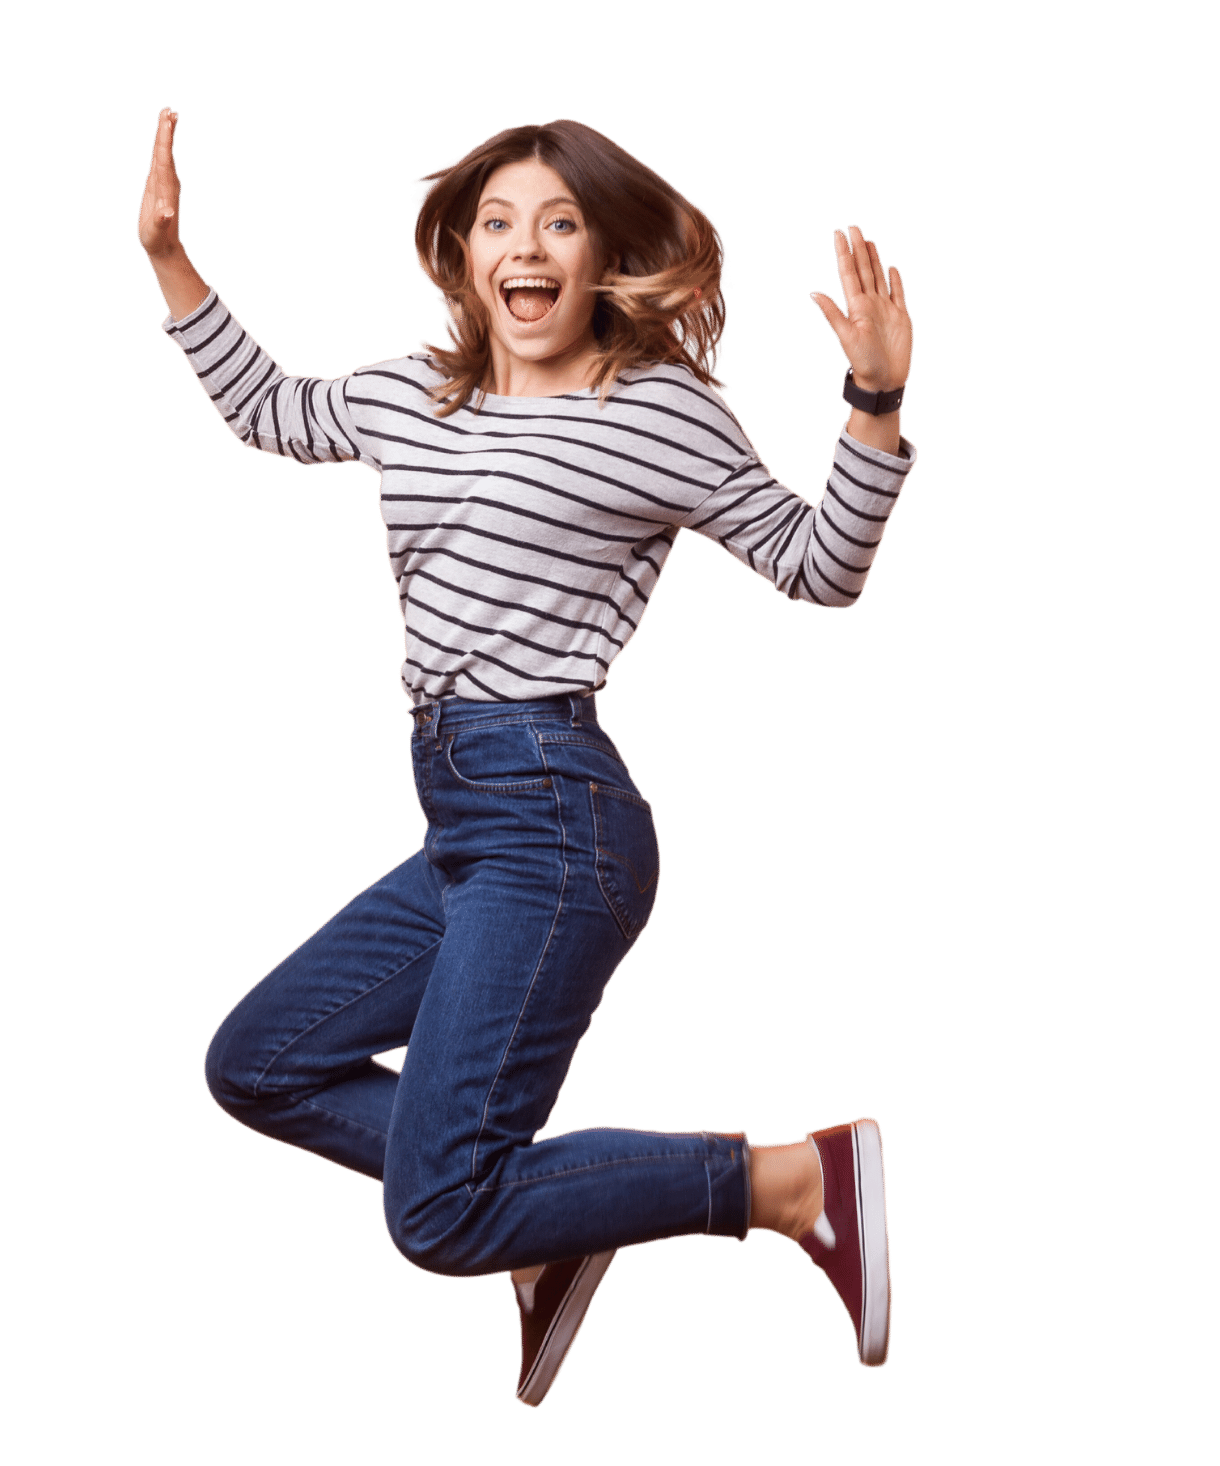 Woman in striped sweater jumping with joy